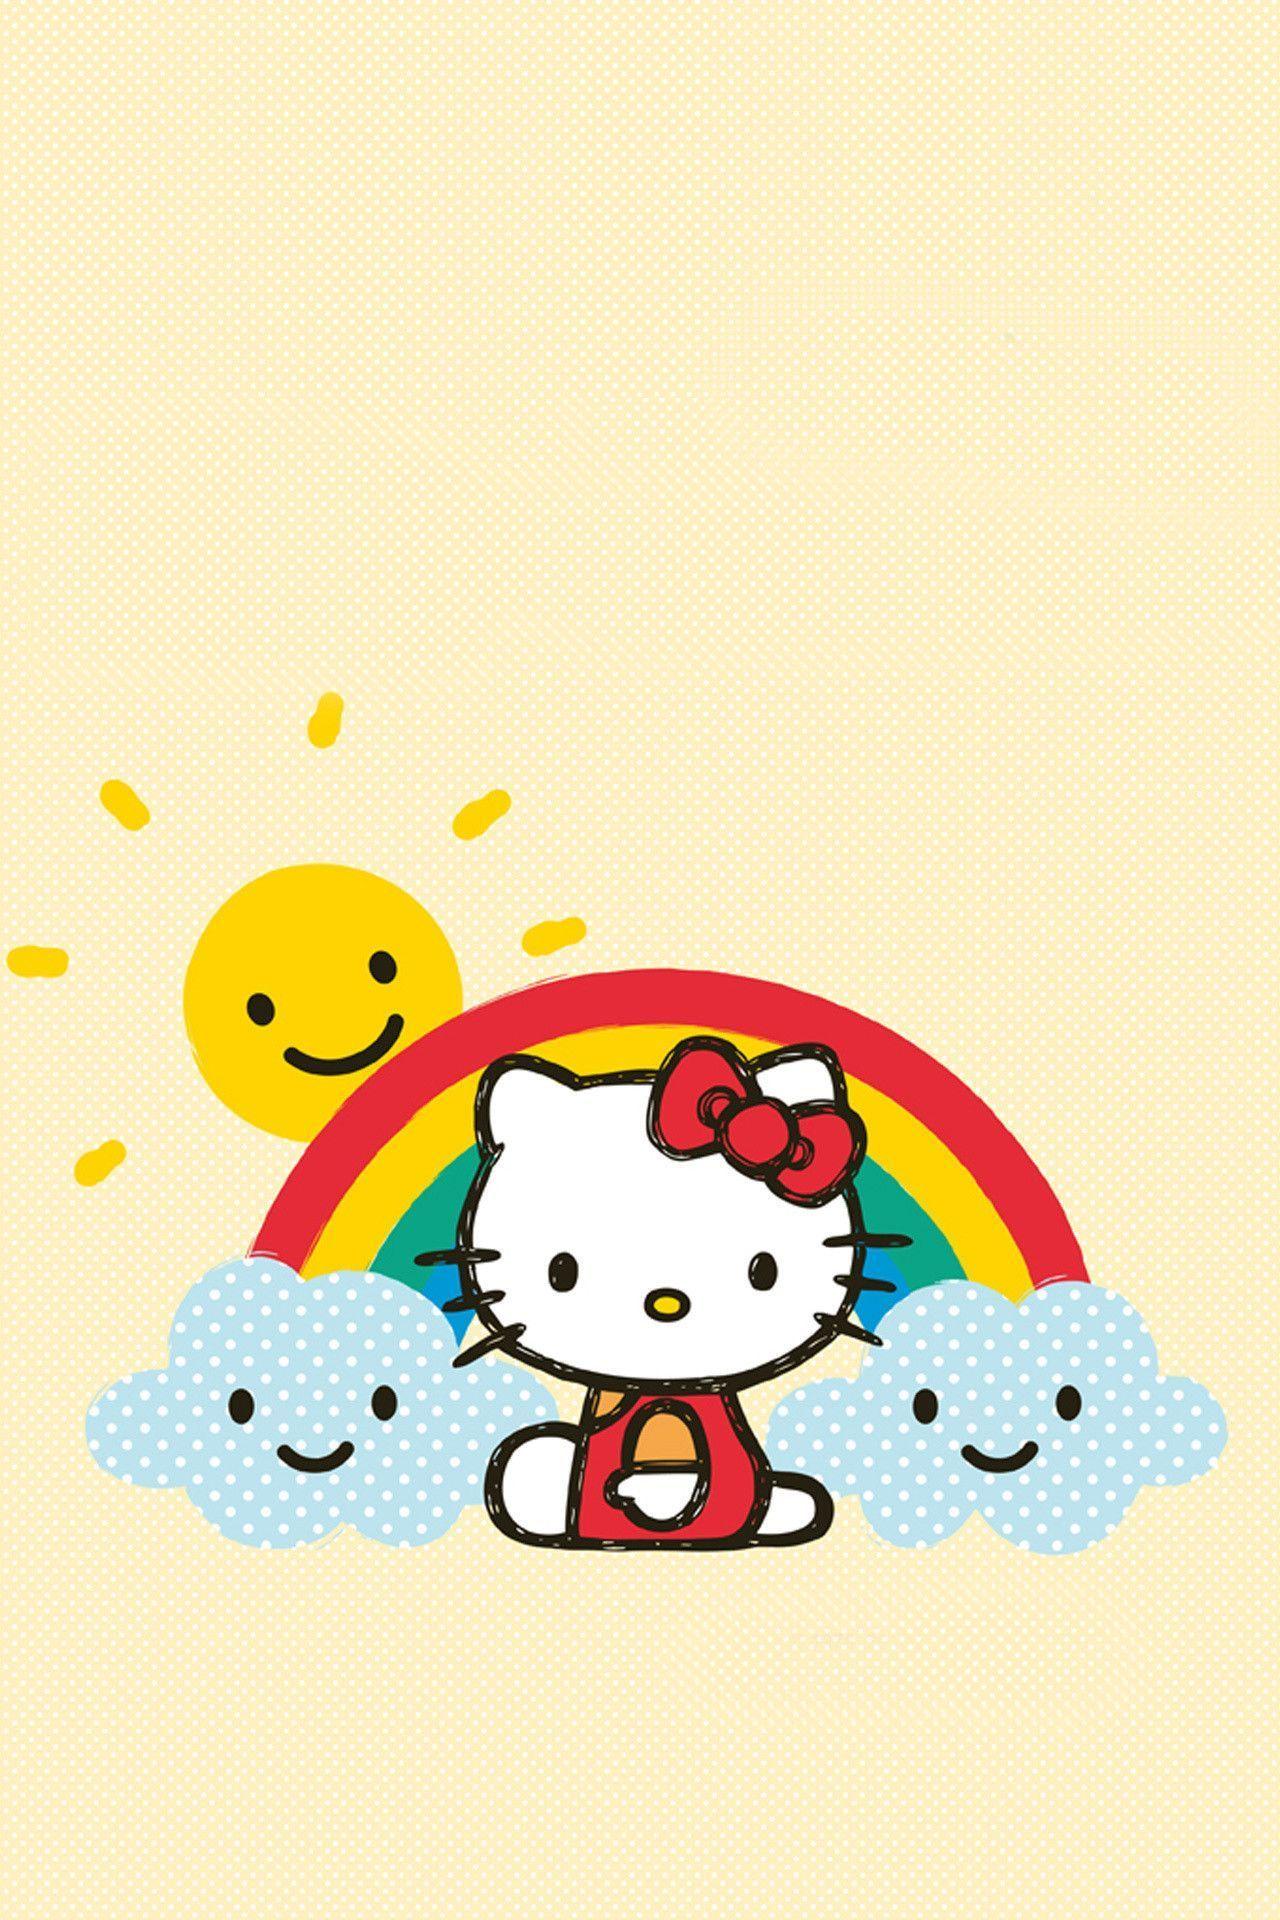 Sanrio Wallpaper. Free for iPhone and Galaxy from Lollimobile